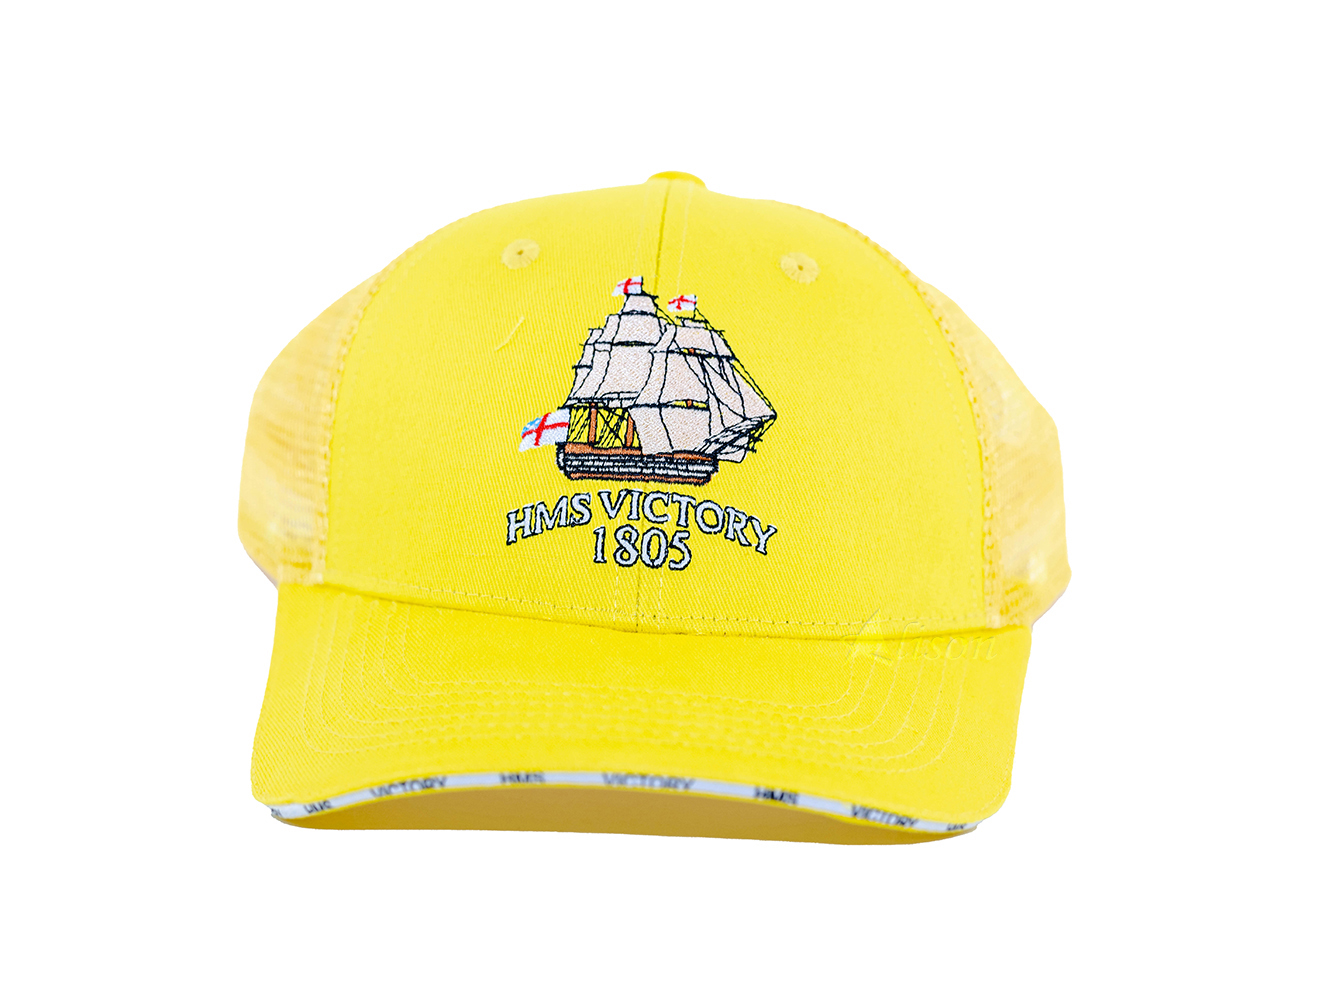 FA001 HMS Victory Embroidered Cap in Yellow by Alison fa001-hms-victory-embroidered-cap-in-yellow-by-alison-l01.jpg